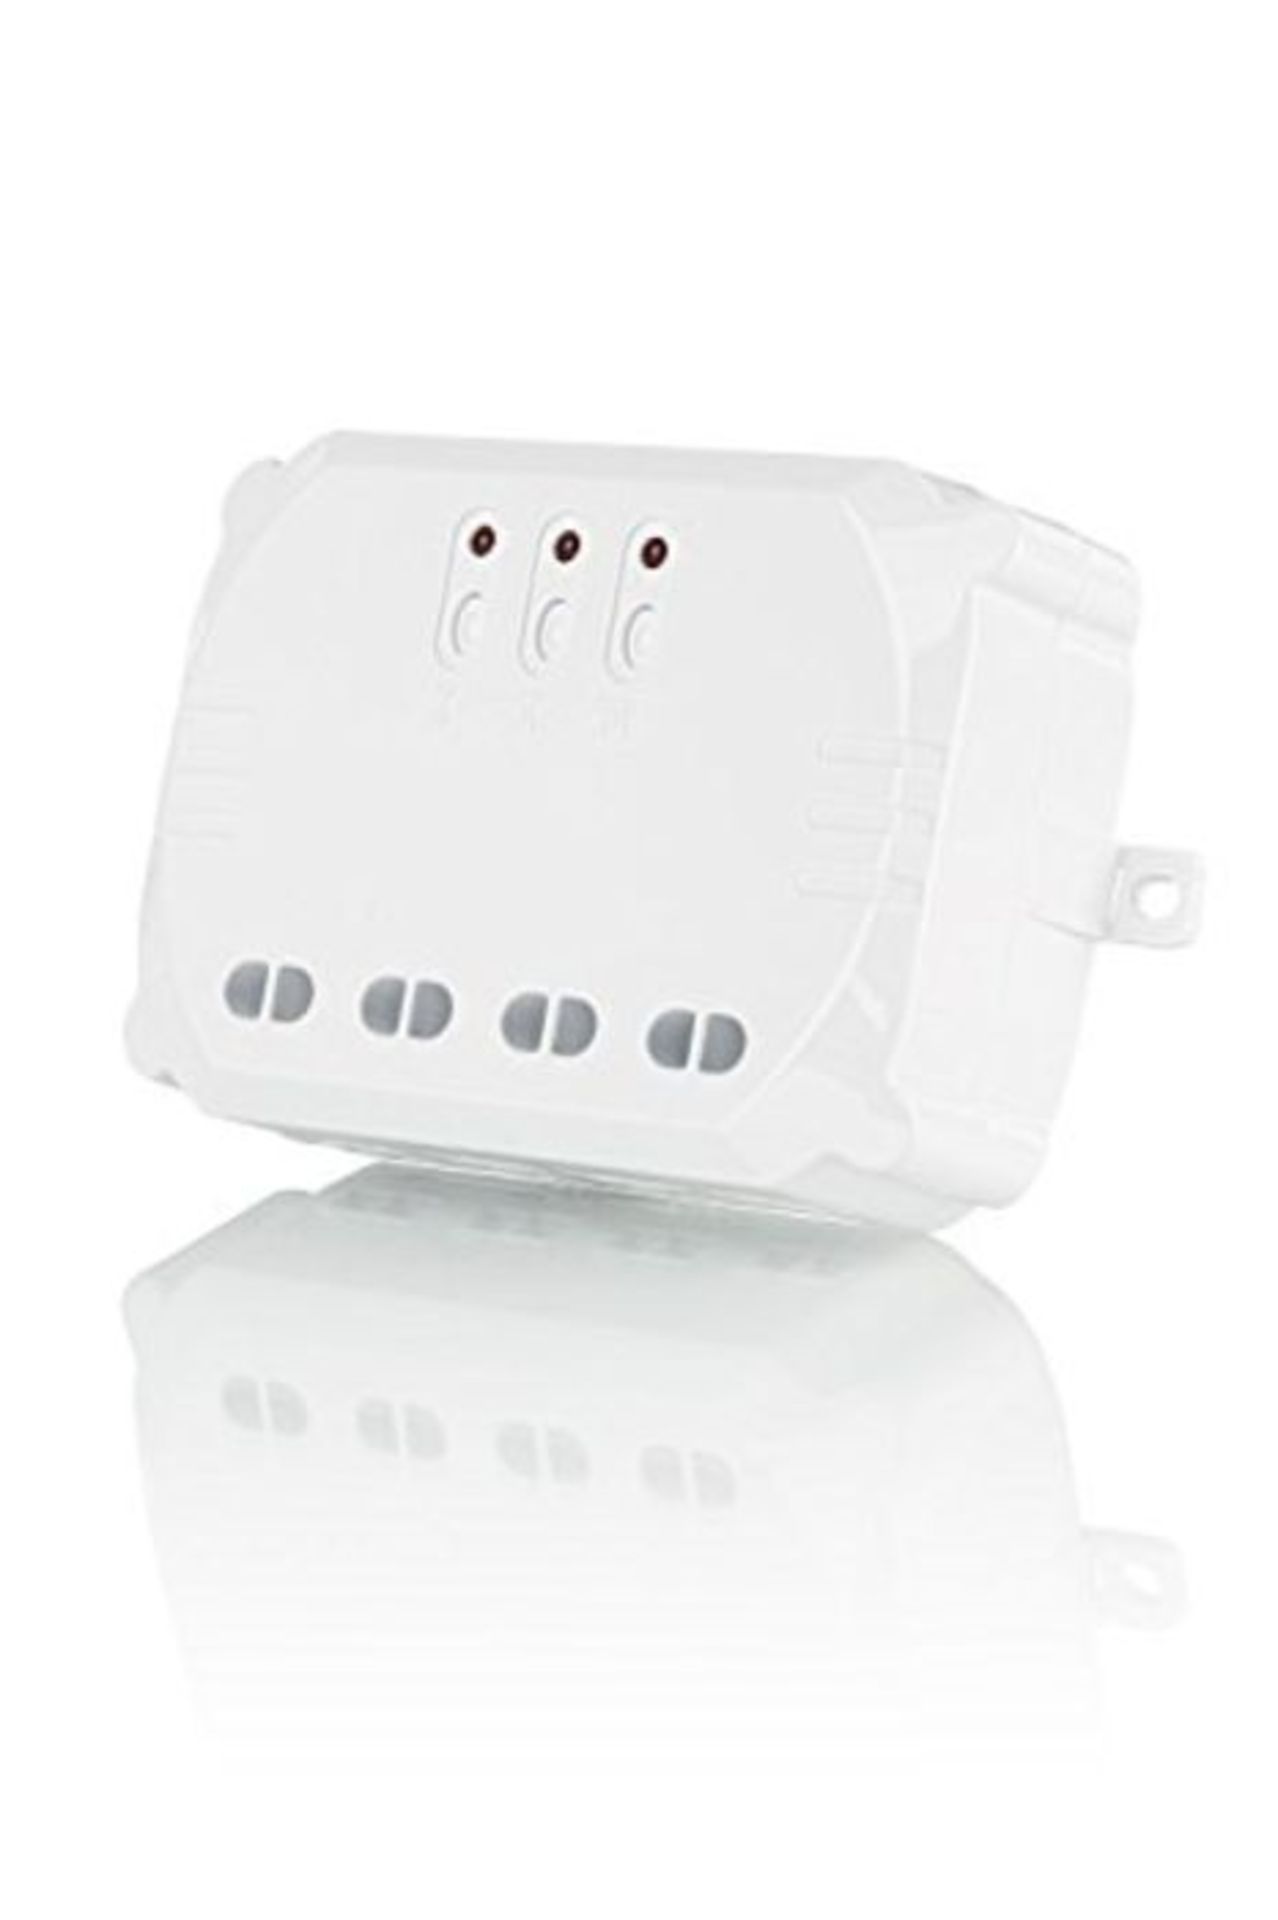 Trust Smart Home ACM-3500-3 Built-In 3-in-1 Switch for Wireless Light Switching